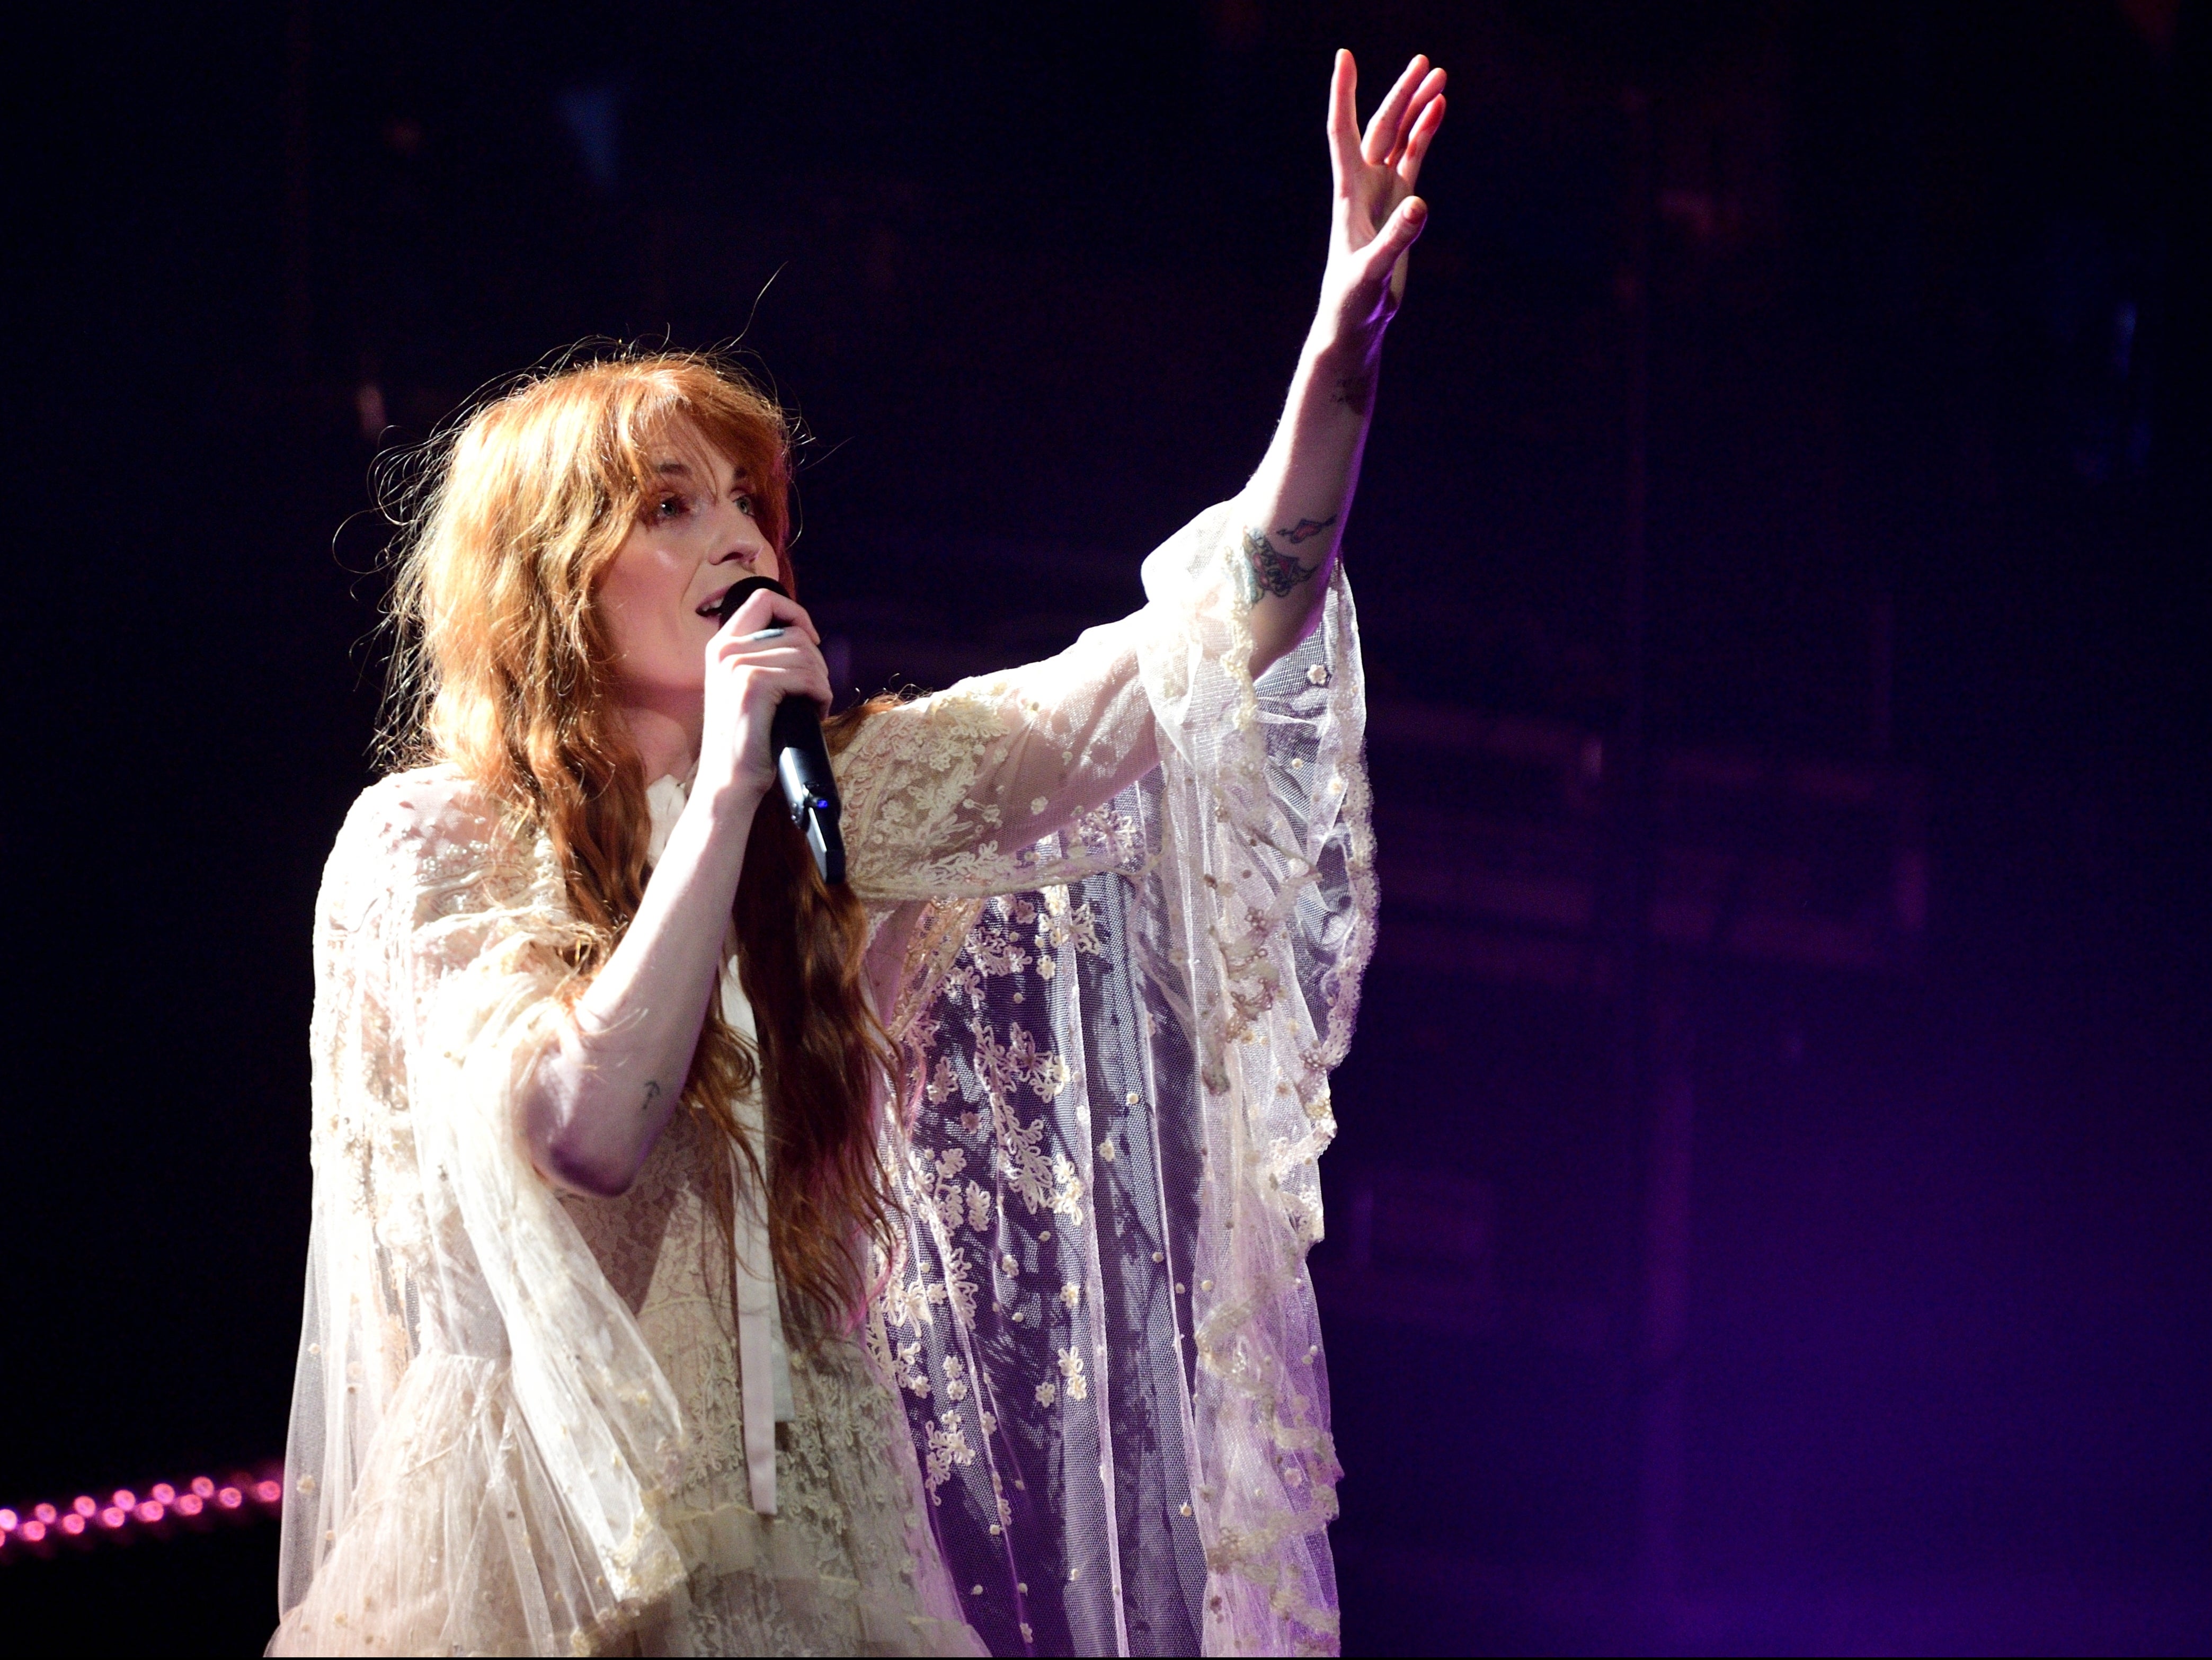 Florence Welch of Florence + the Machine performs on stage at Theatre Royal Drury Lane on 19 April, 2022 in London, England